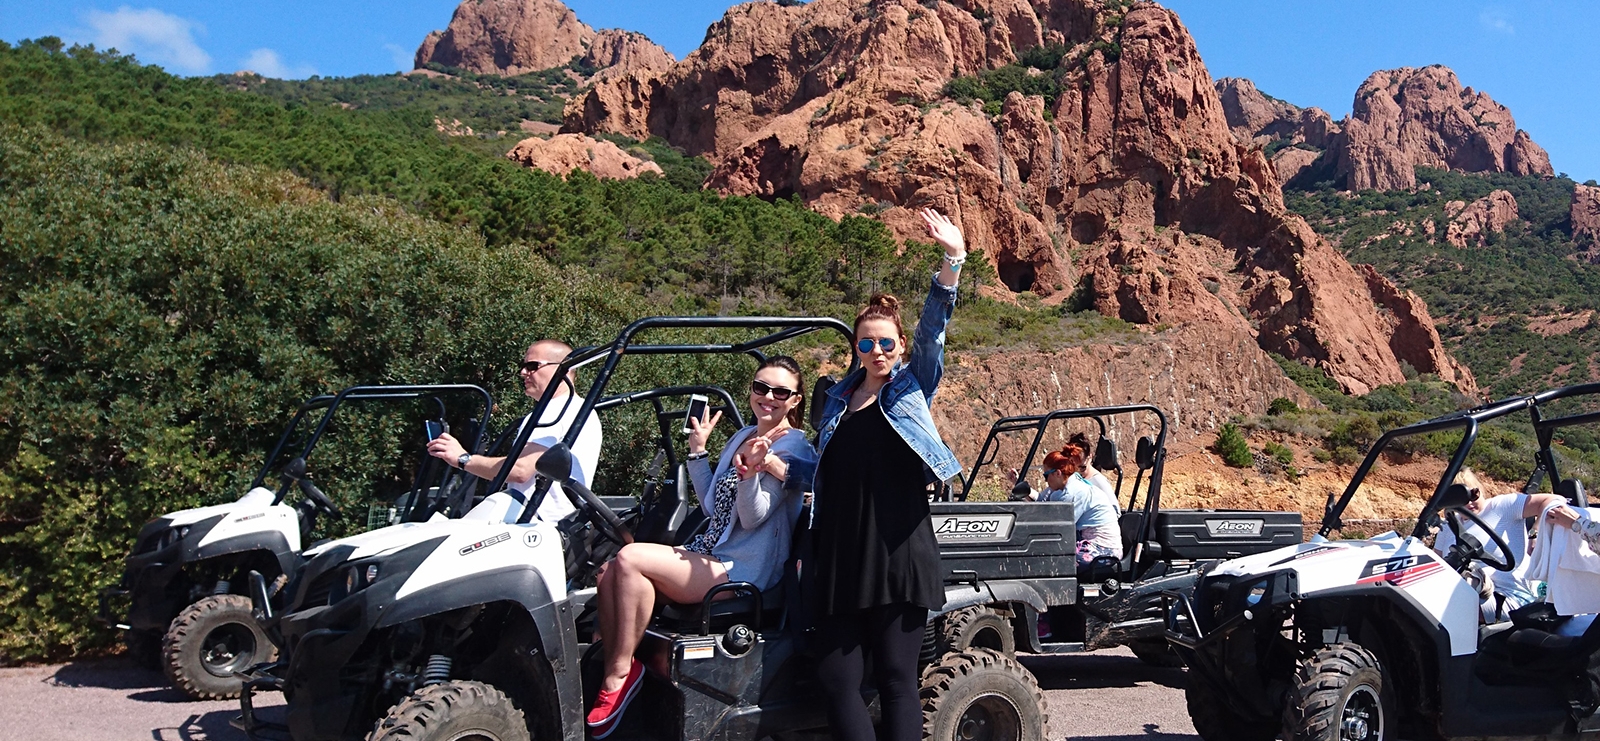 Buggy Tours by Esterel Aventures